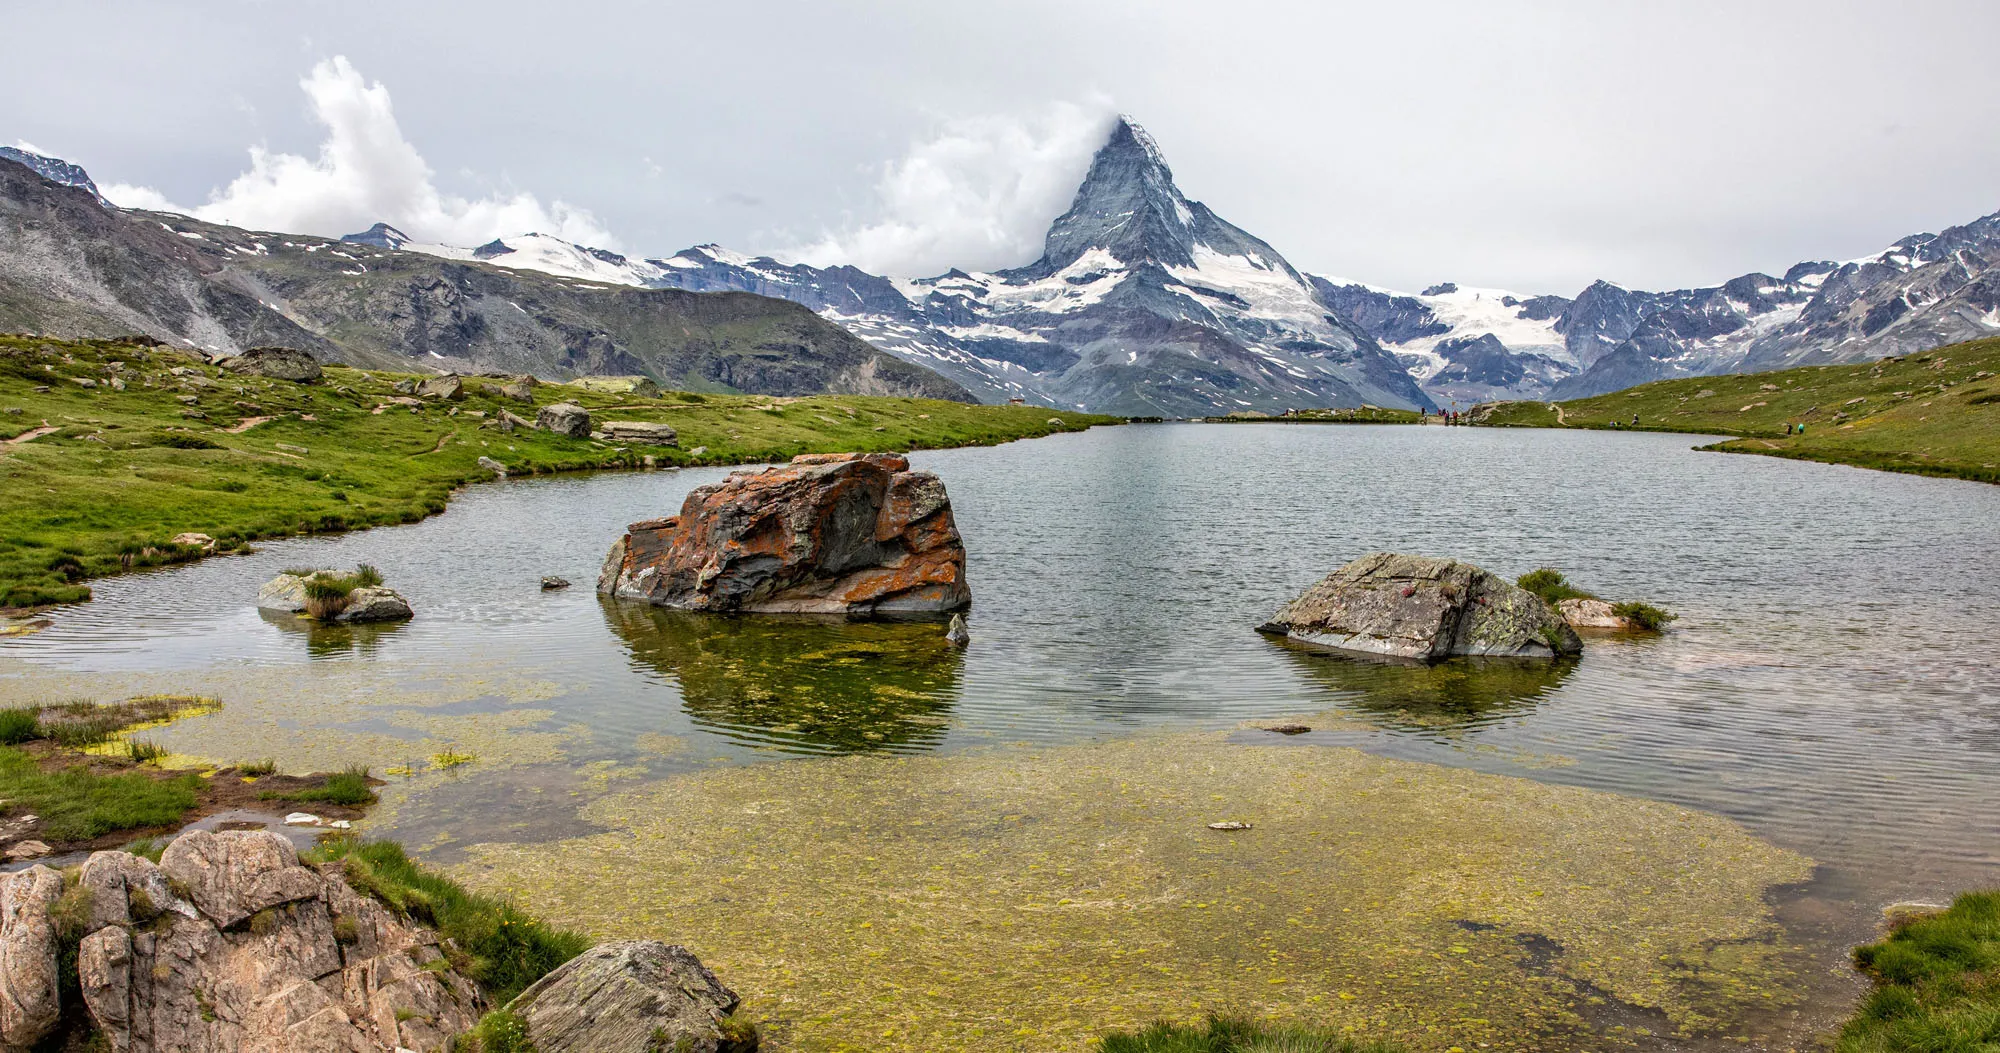 Featured image for “The Five Lakes Trail (5-Seenweg) in Zermatt…Is it Worth It?”